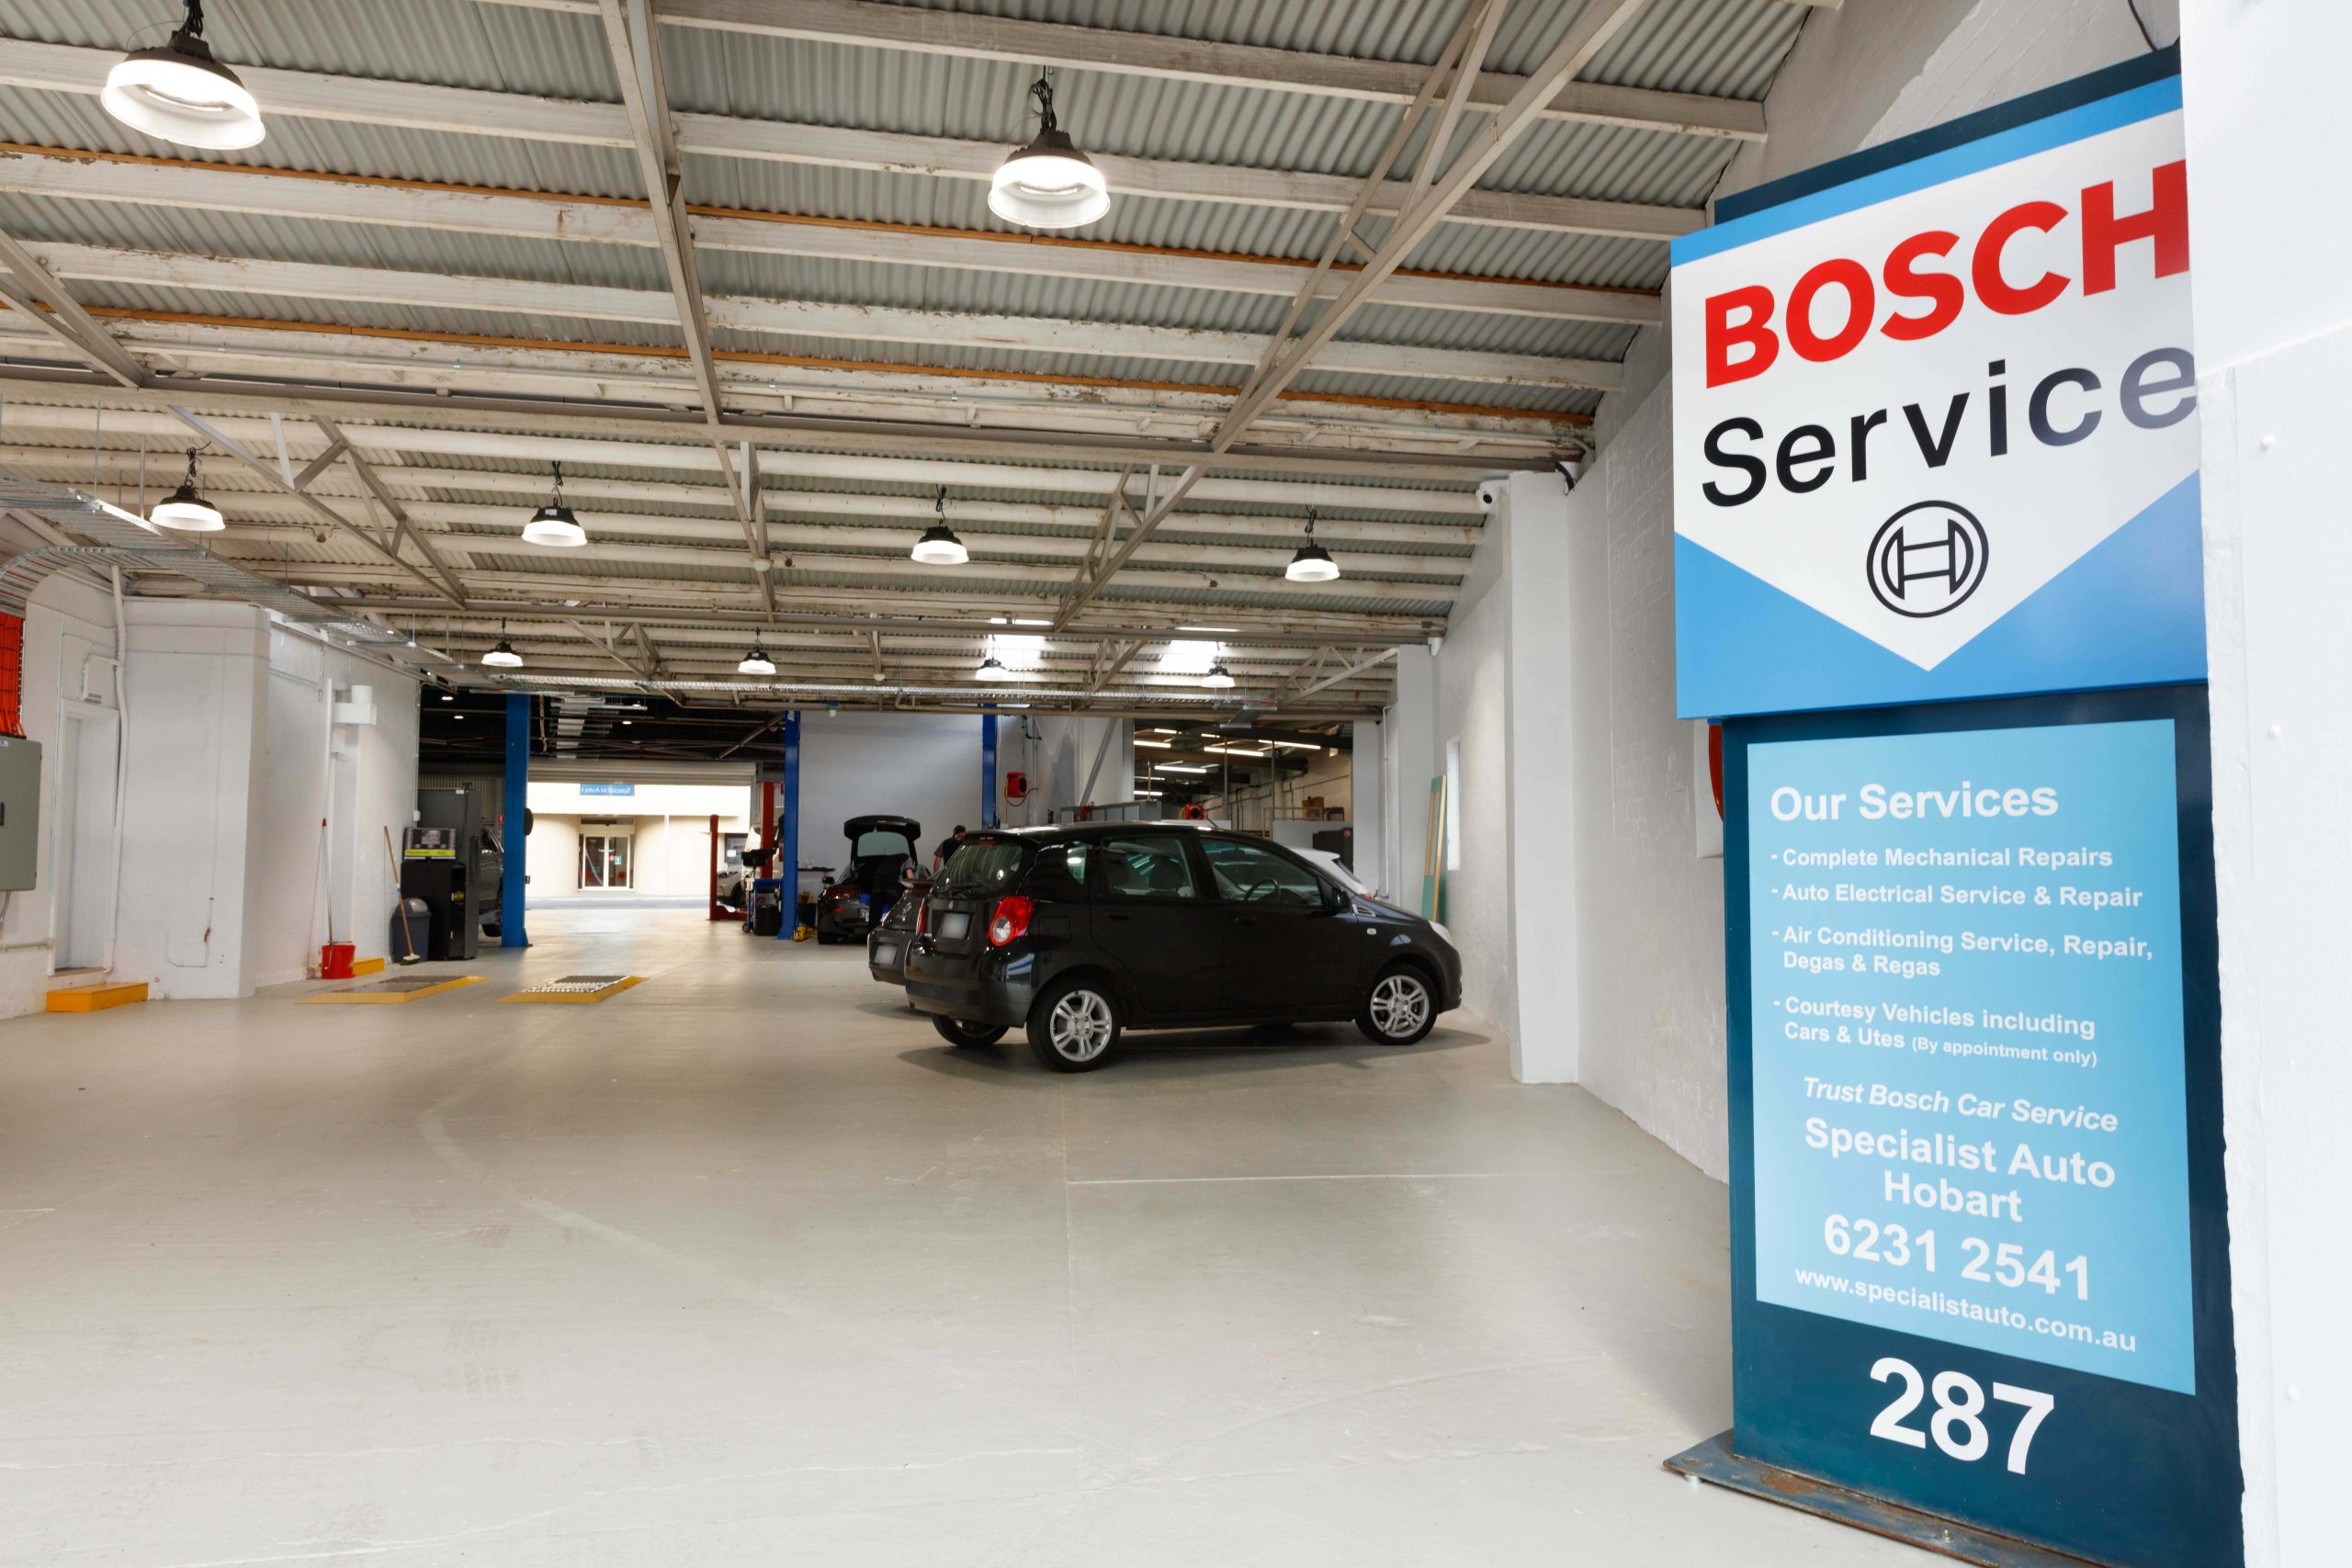 Specialist Auto Group Hobart